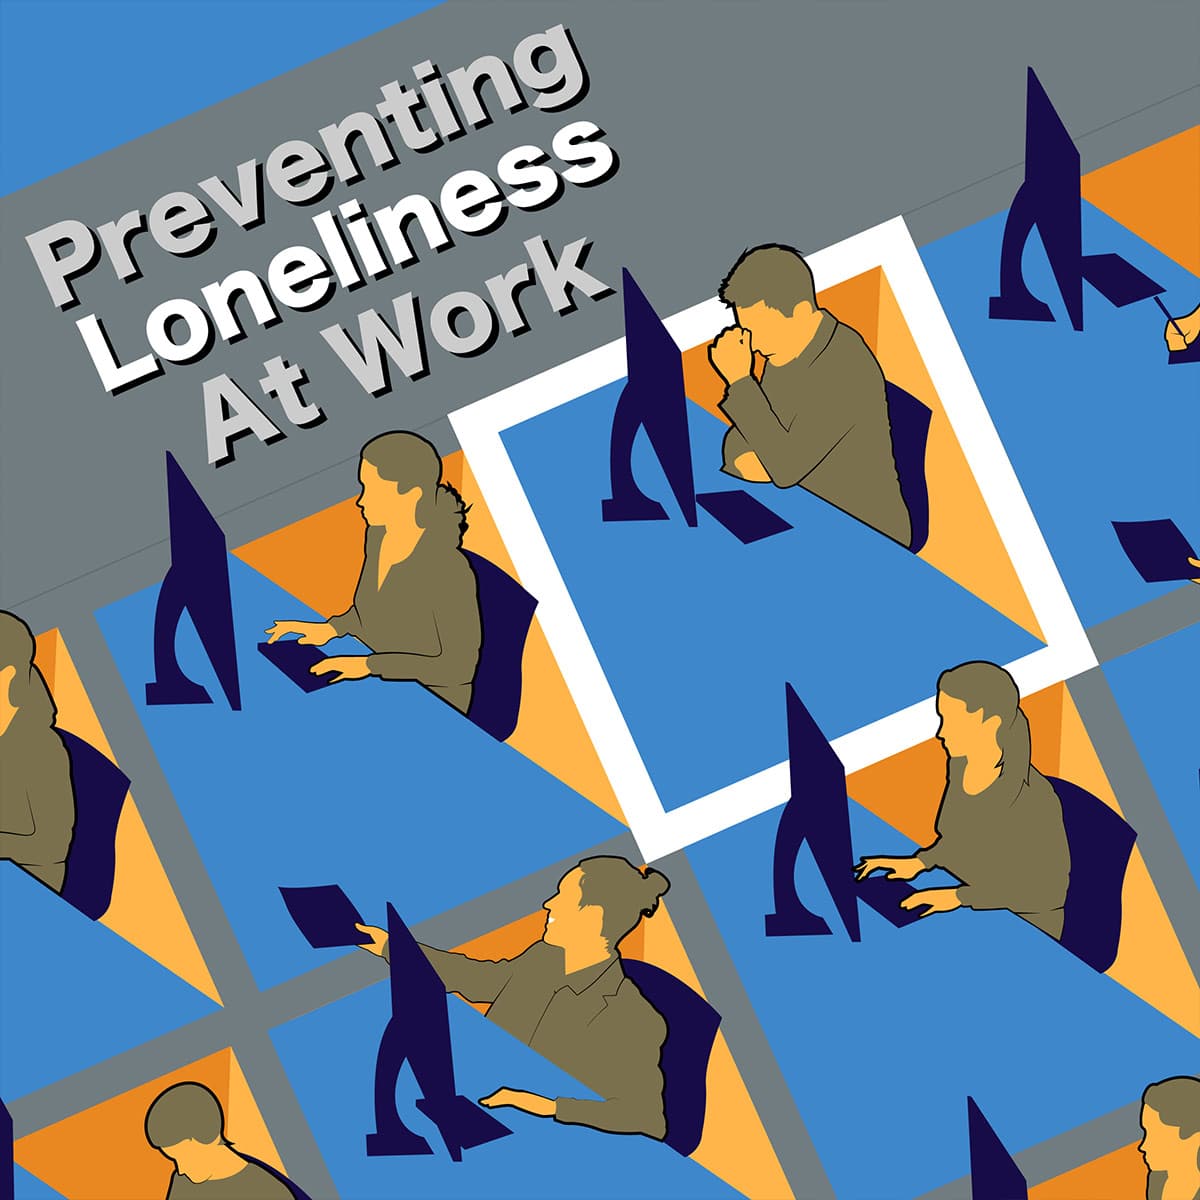 group of people in an abstract office setting in which one person feels lonely, 'Preventing Loneliness At Work'